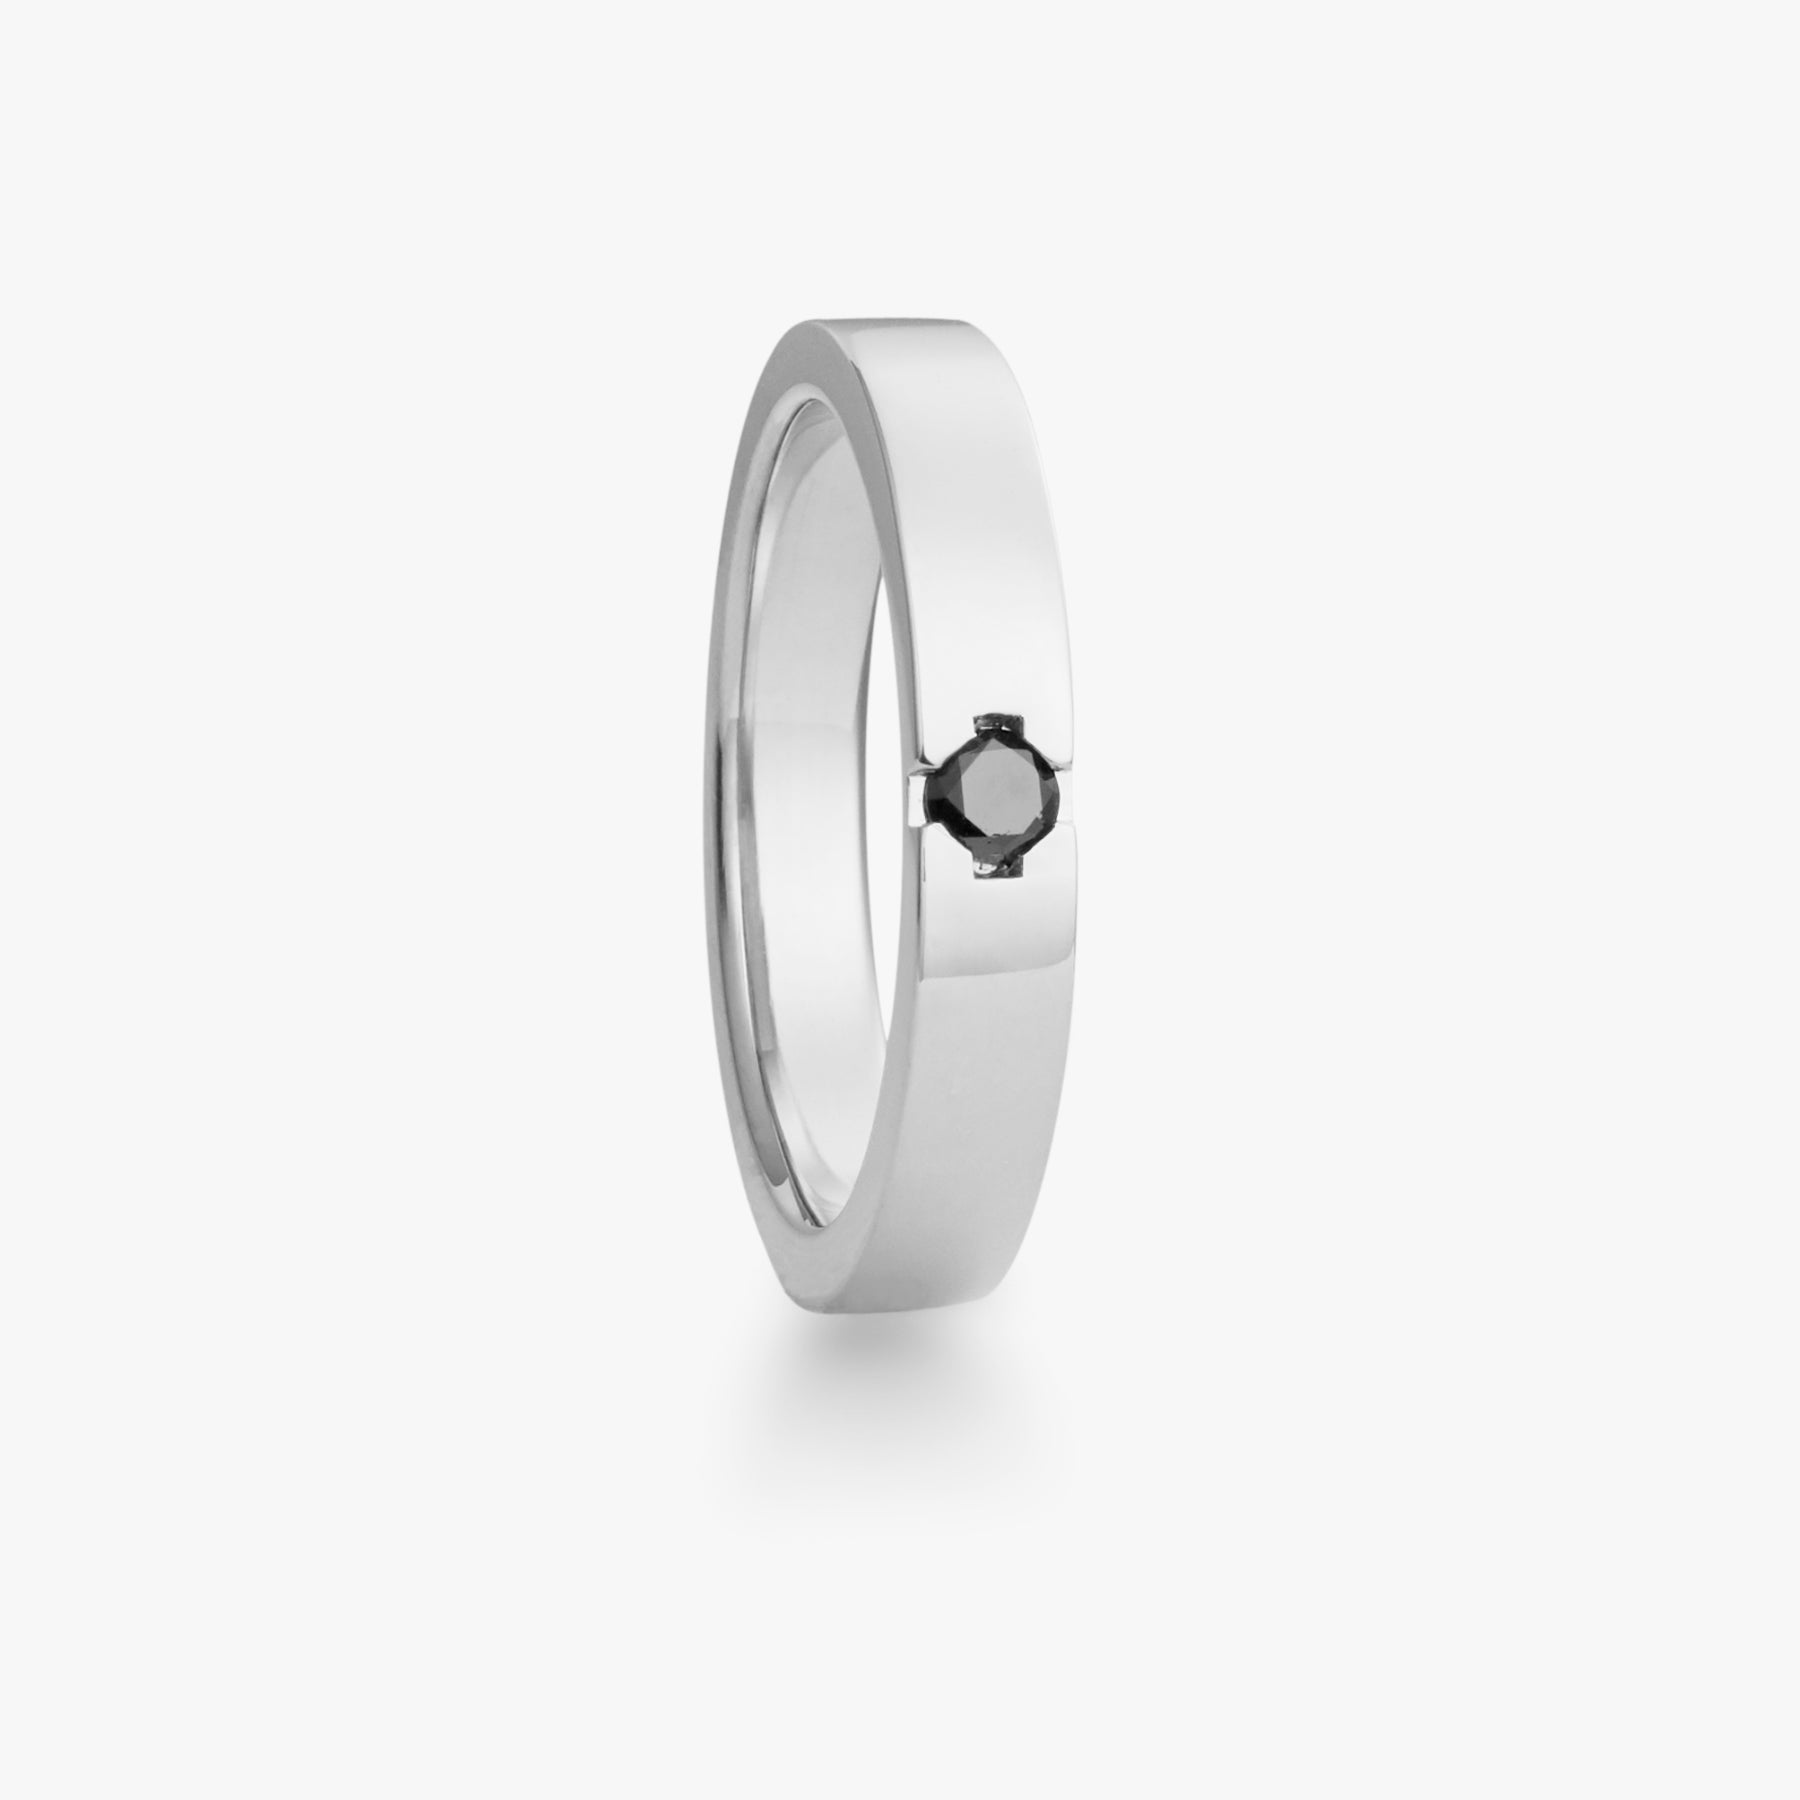 Majestic ring in white gold with black diamond, men&